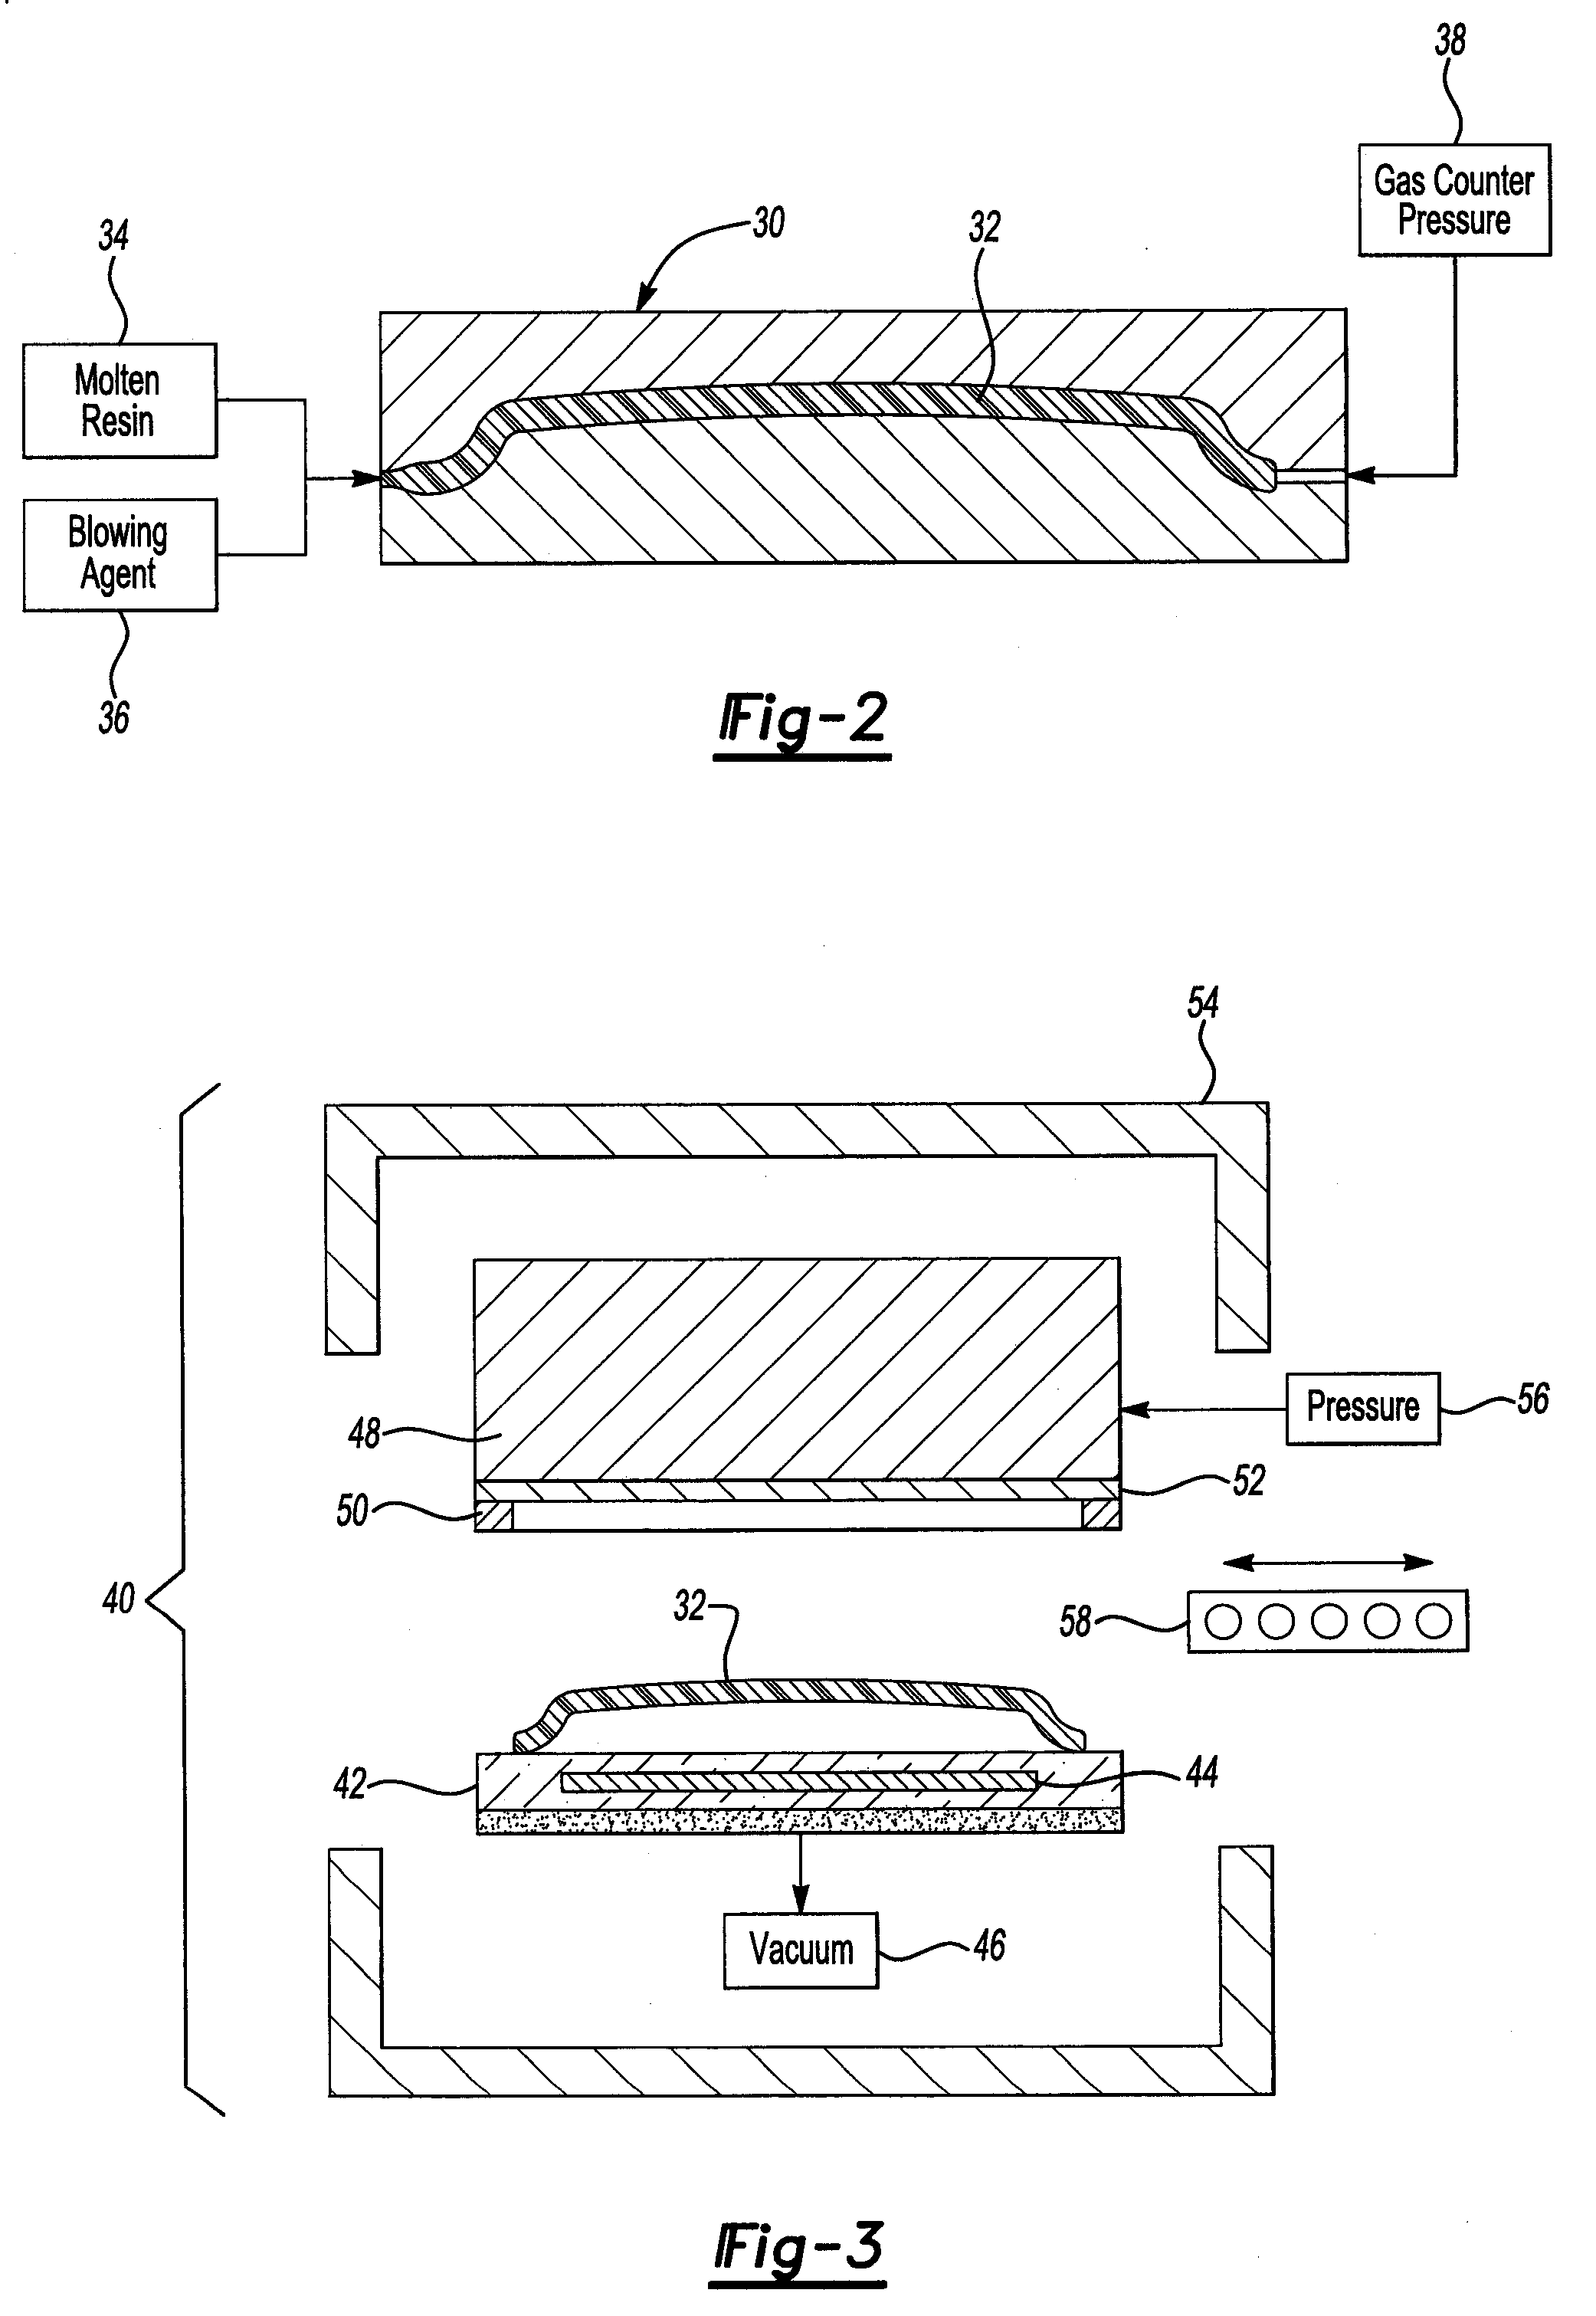 Post molding application of an extruded film to an injection molded part